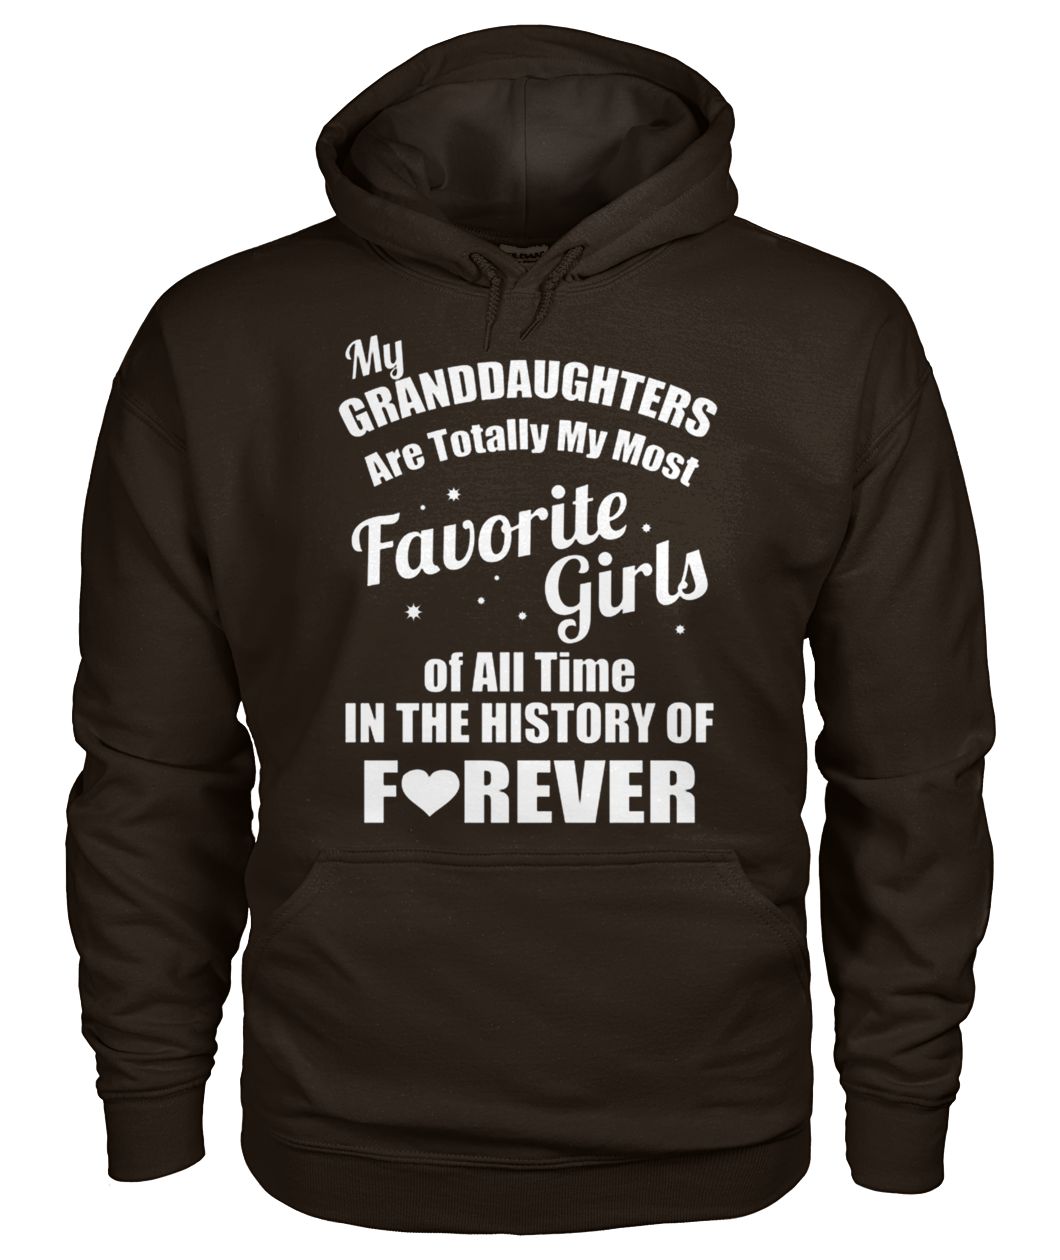 My granddaughter is totally my most favorite girl of all time in the history of forever hoodie